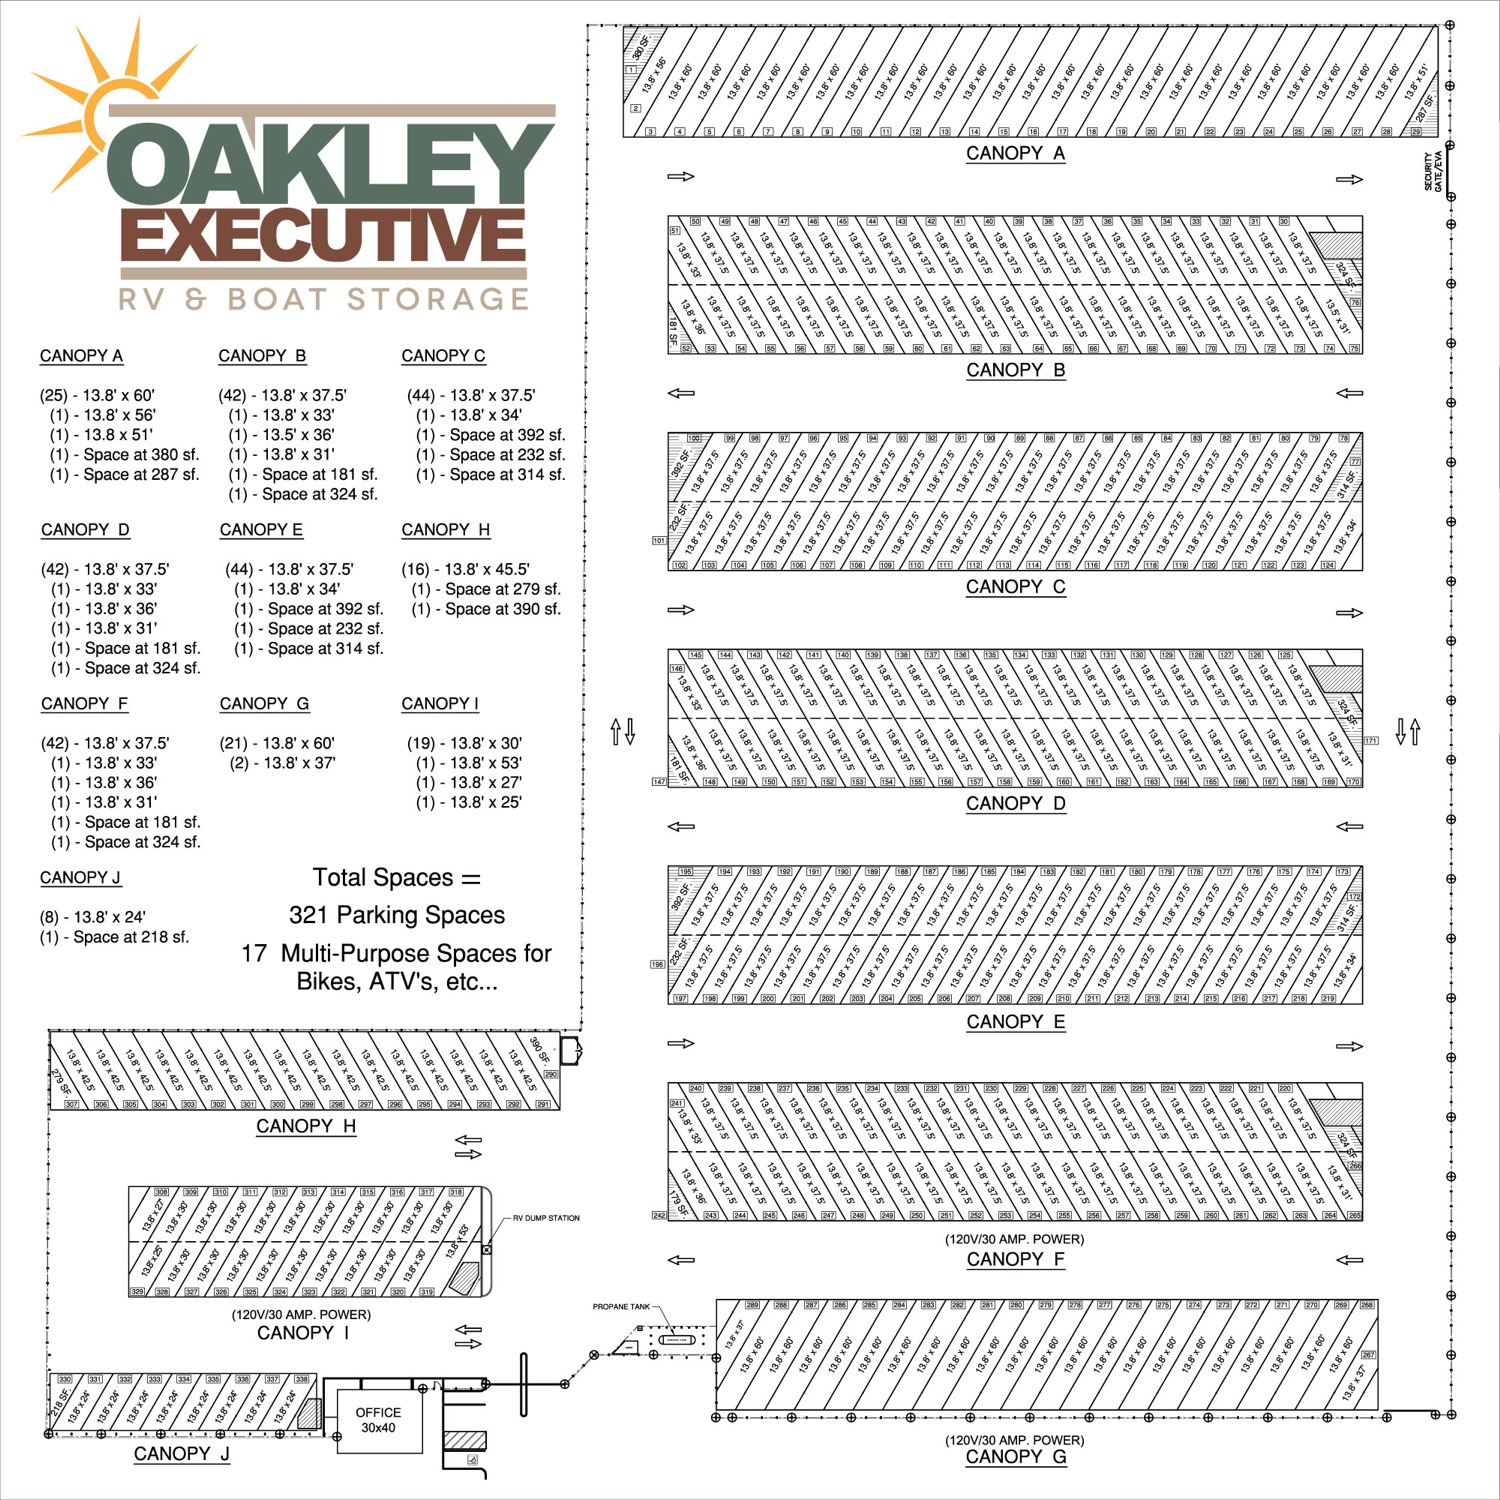 Oakley Executive RV & Boat Storage Selects Near Me Web Design for Website  Optimization and SEO